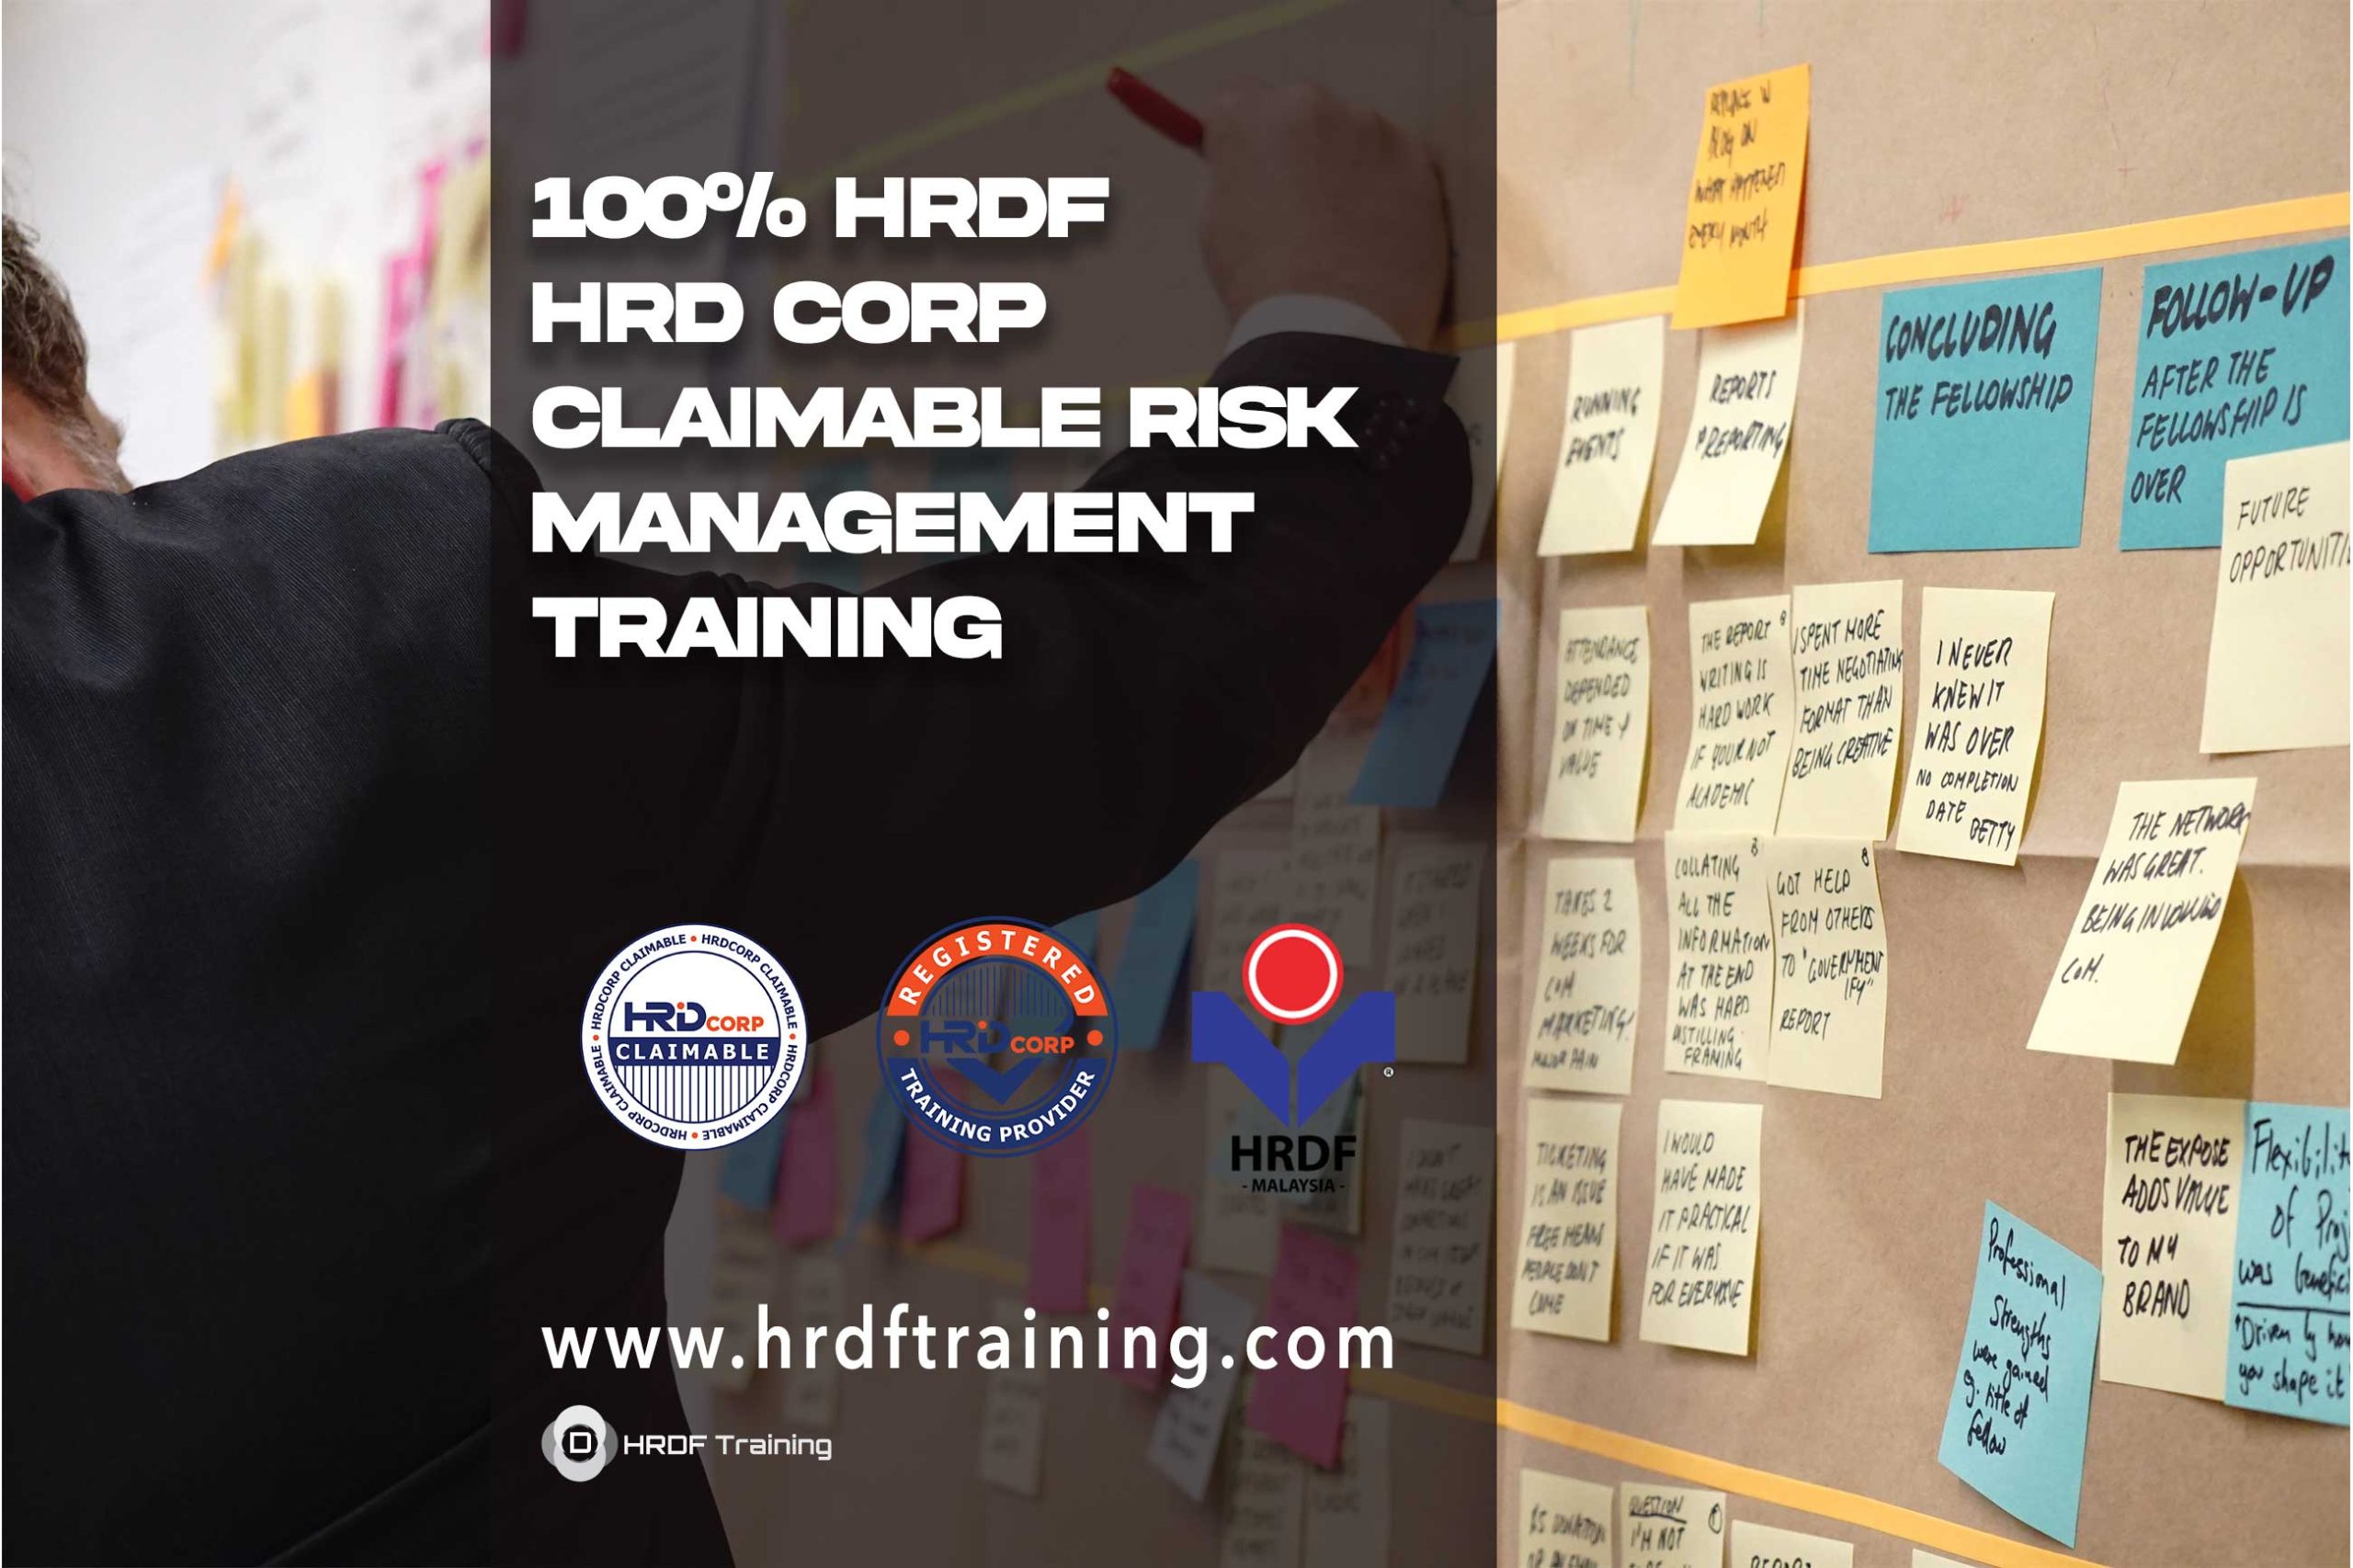 HRDF-HRD-Corp-Claimable-Risk-Management-Training